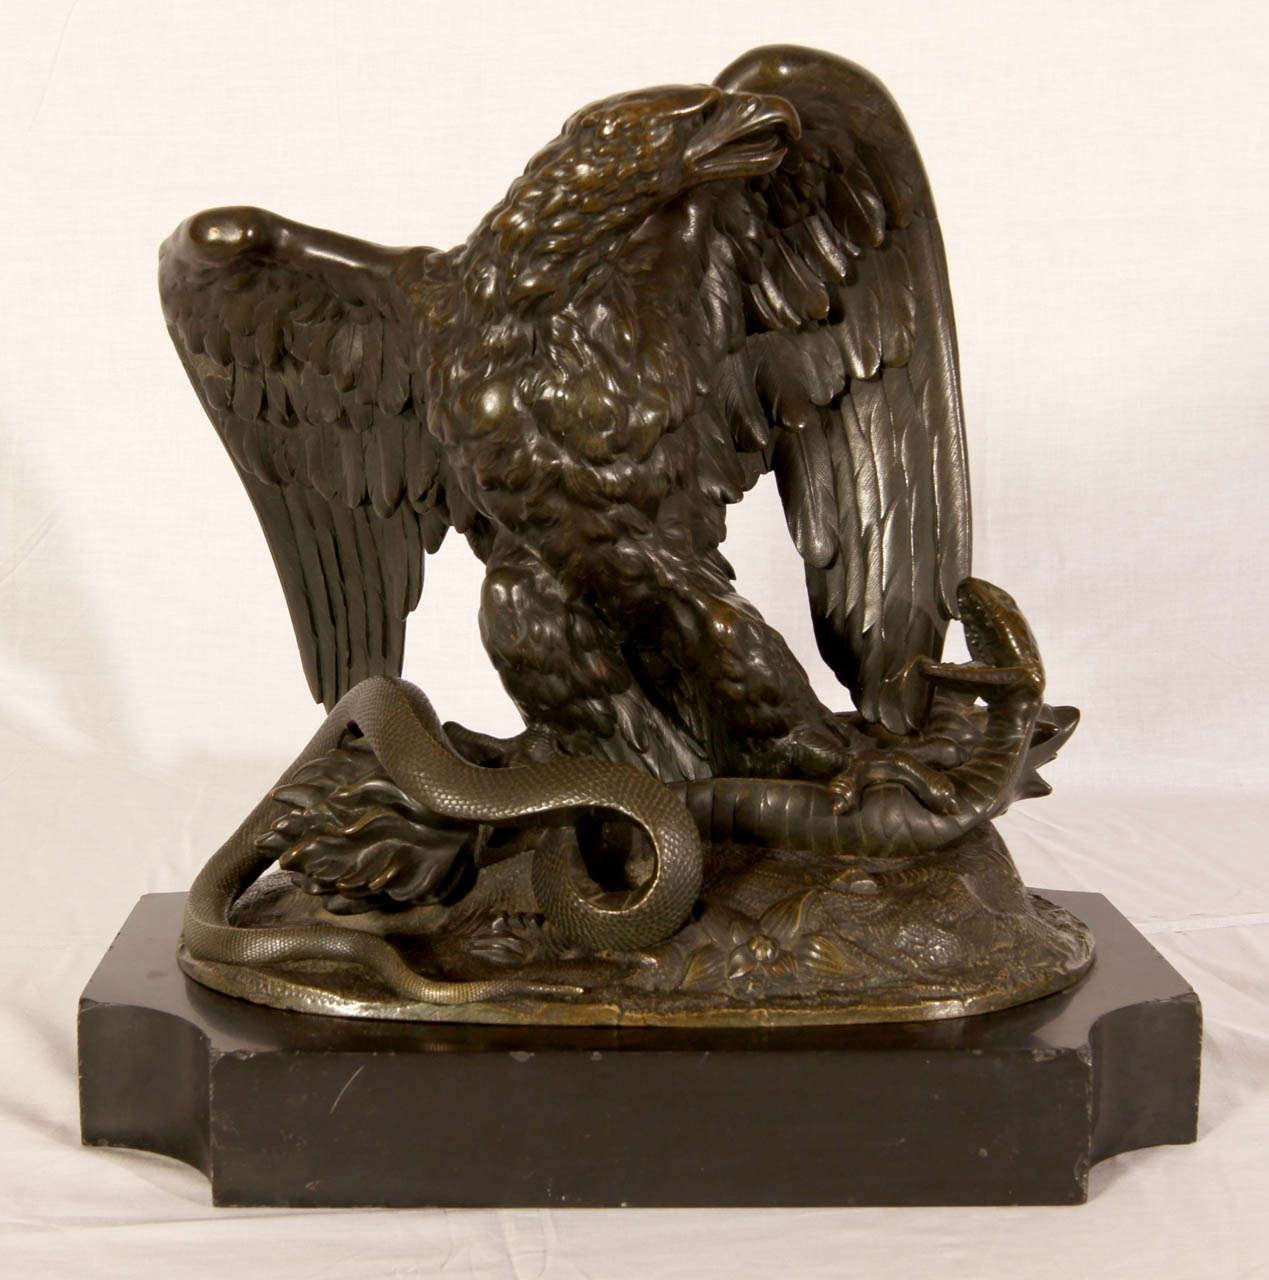 19th Century bronze with brown patina sculpture 'L'Aigle au serpent' (The eagle and the snake). Good condition. Normal wear consistent with age and use.